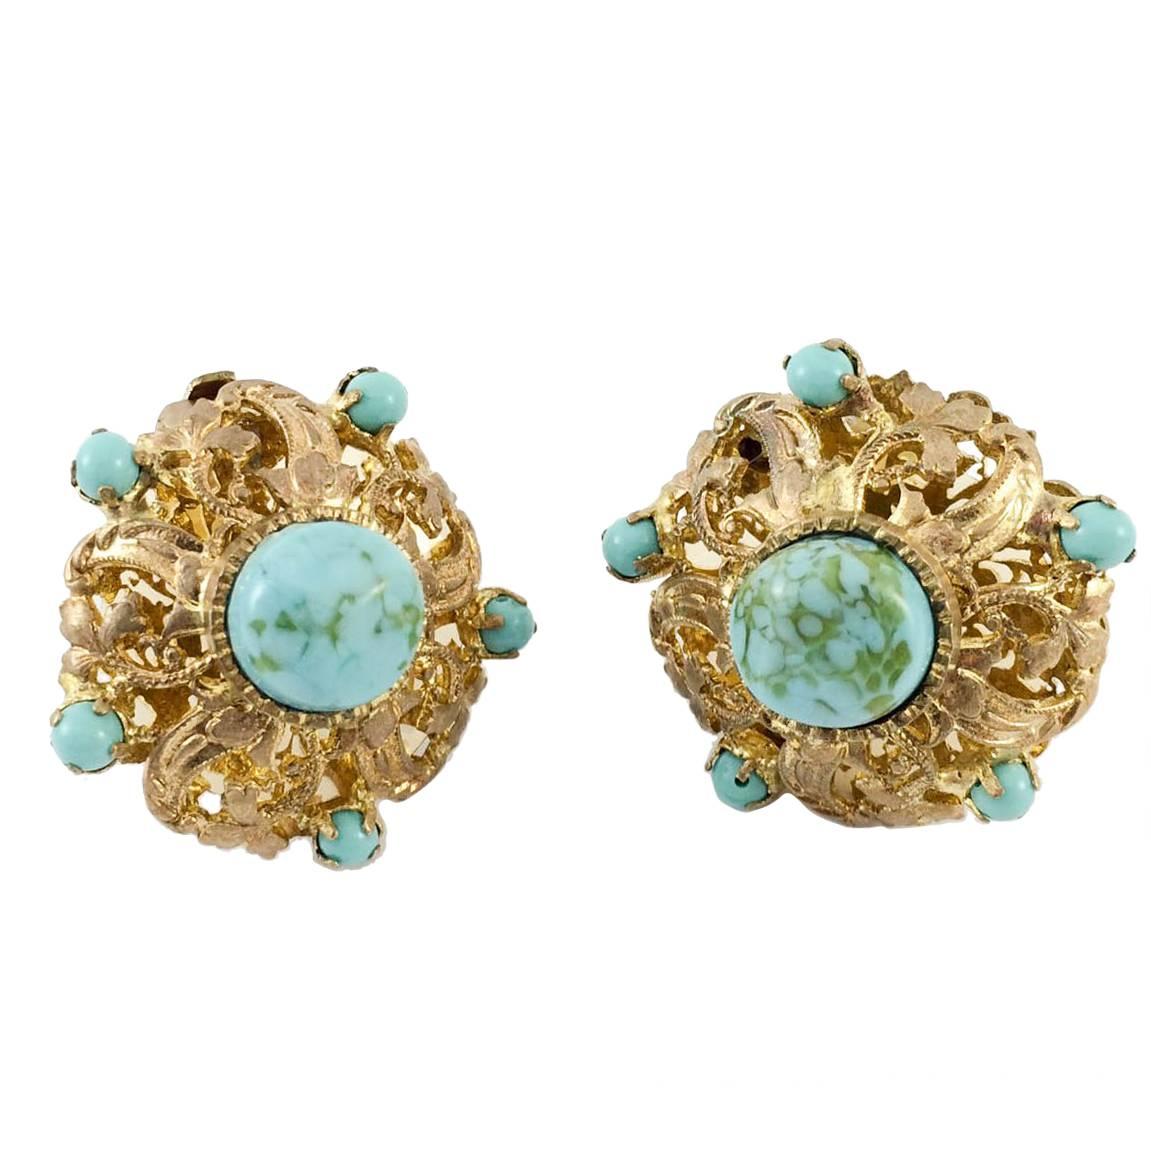 Chanel (by Maison Gripoix) Turquoise Poured Glass Clip-on Earrings - 1950s